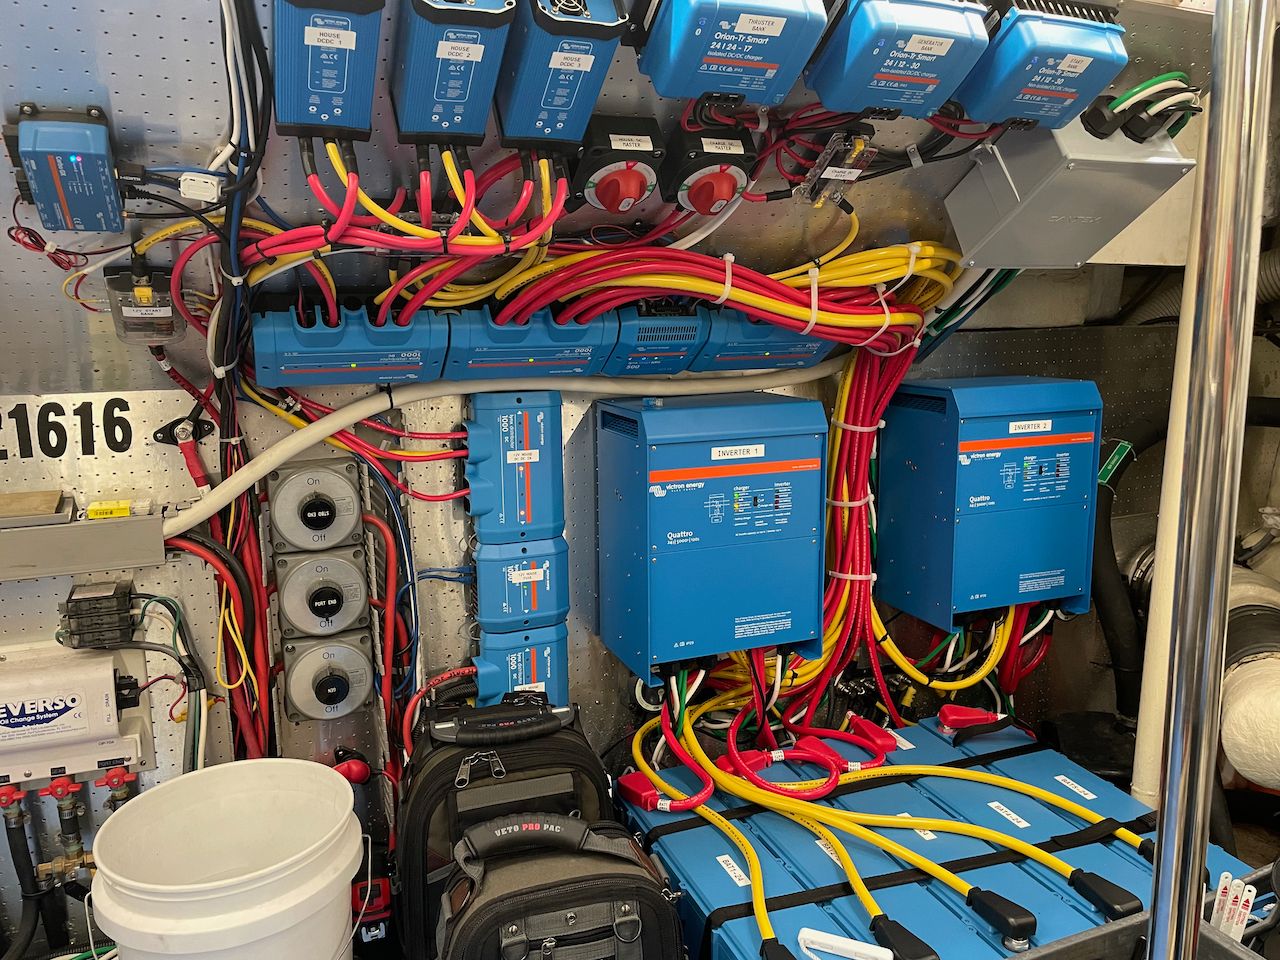 Victron electrical system after 14 months